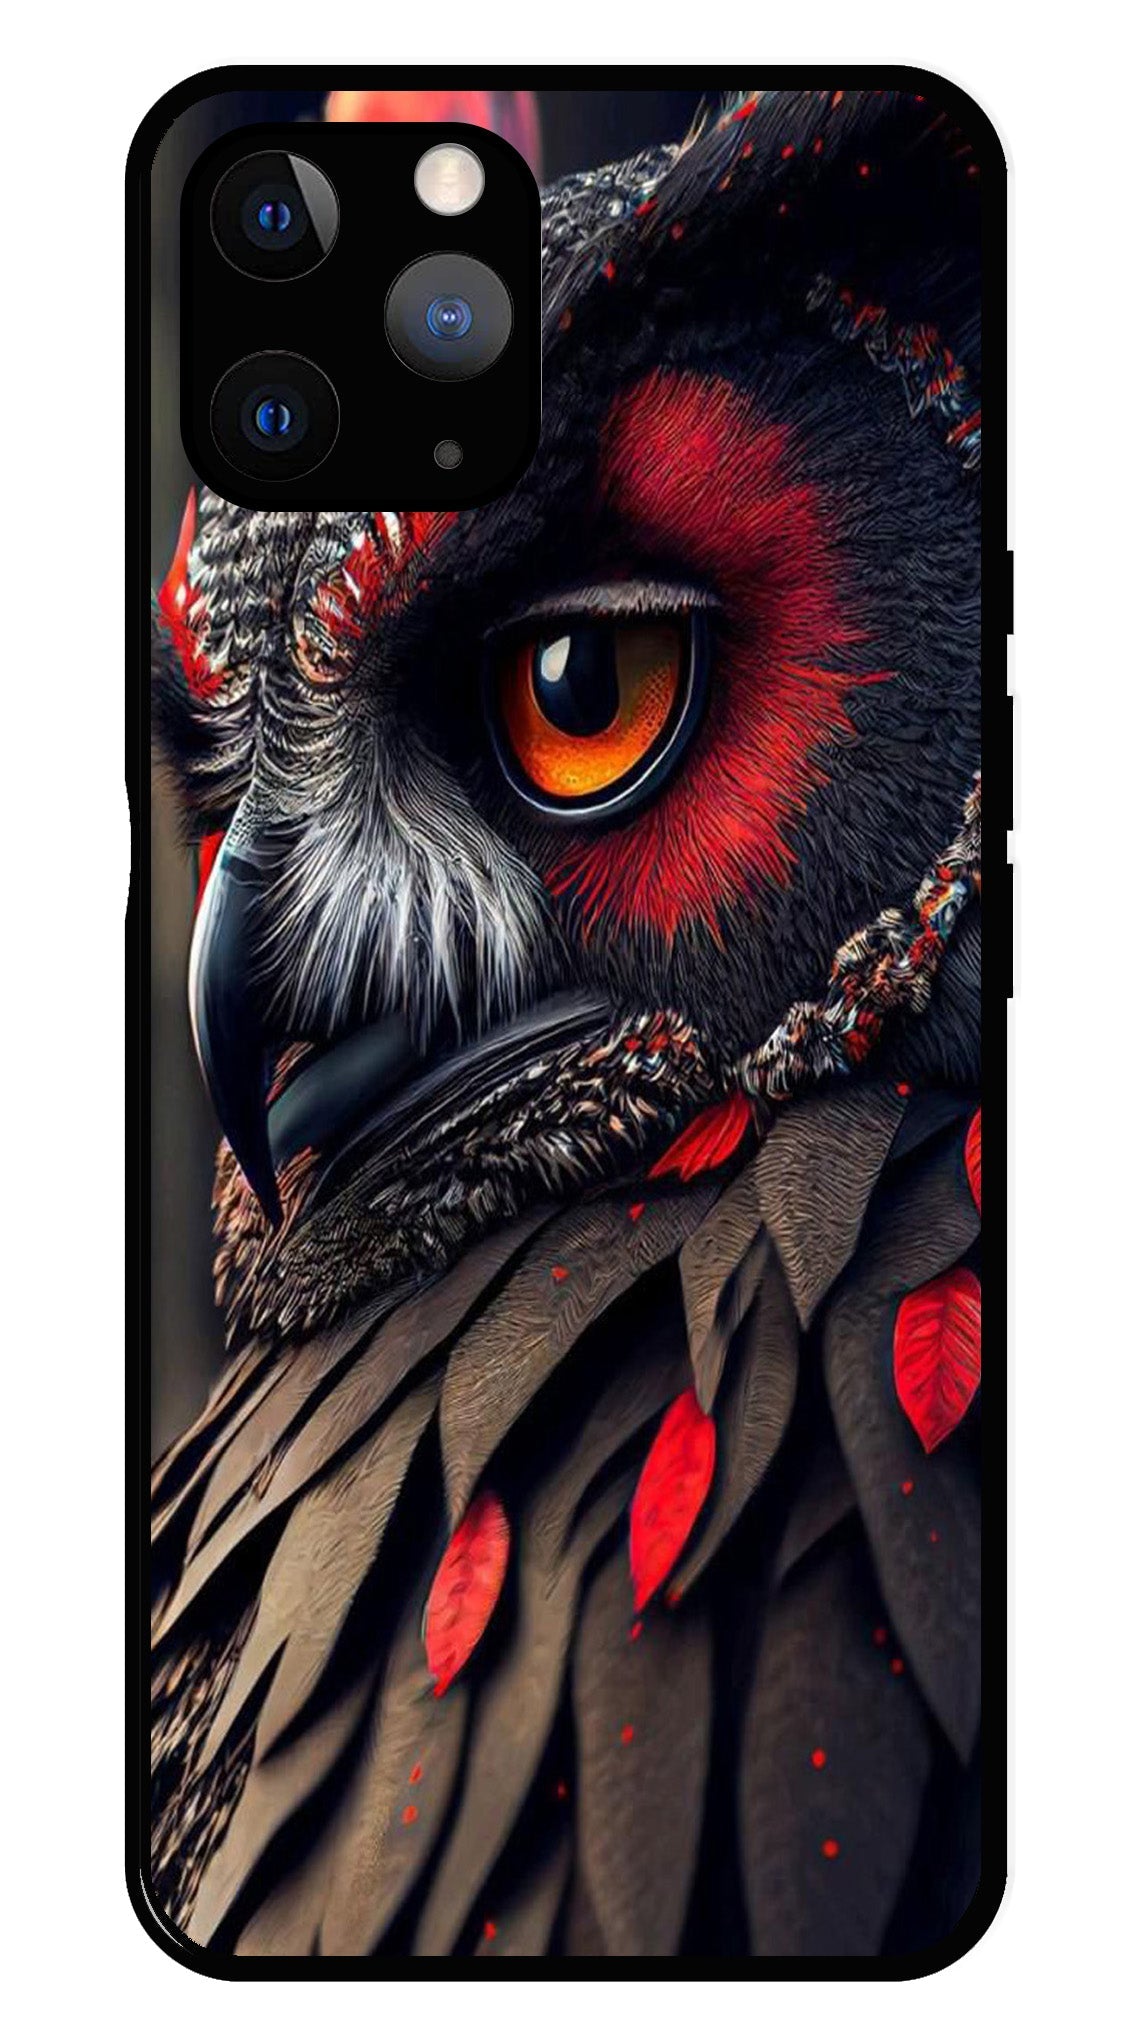 Owl Design Metal Mobile Case for iPhone 11 Pro Max